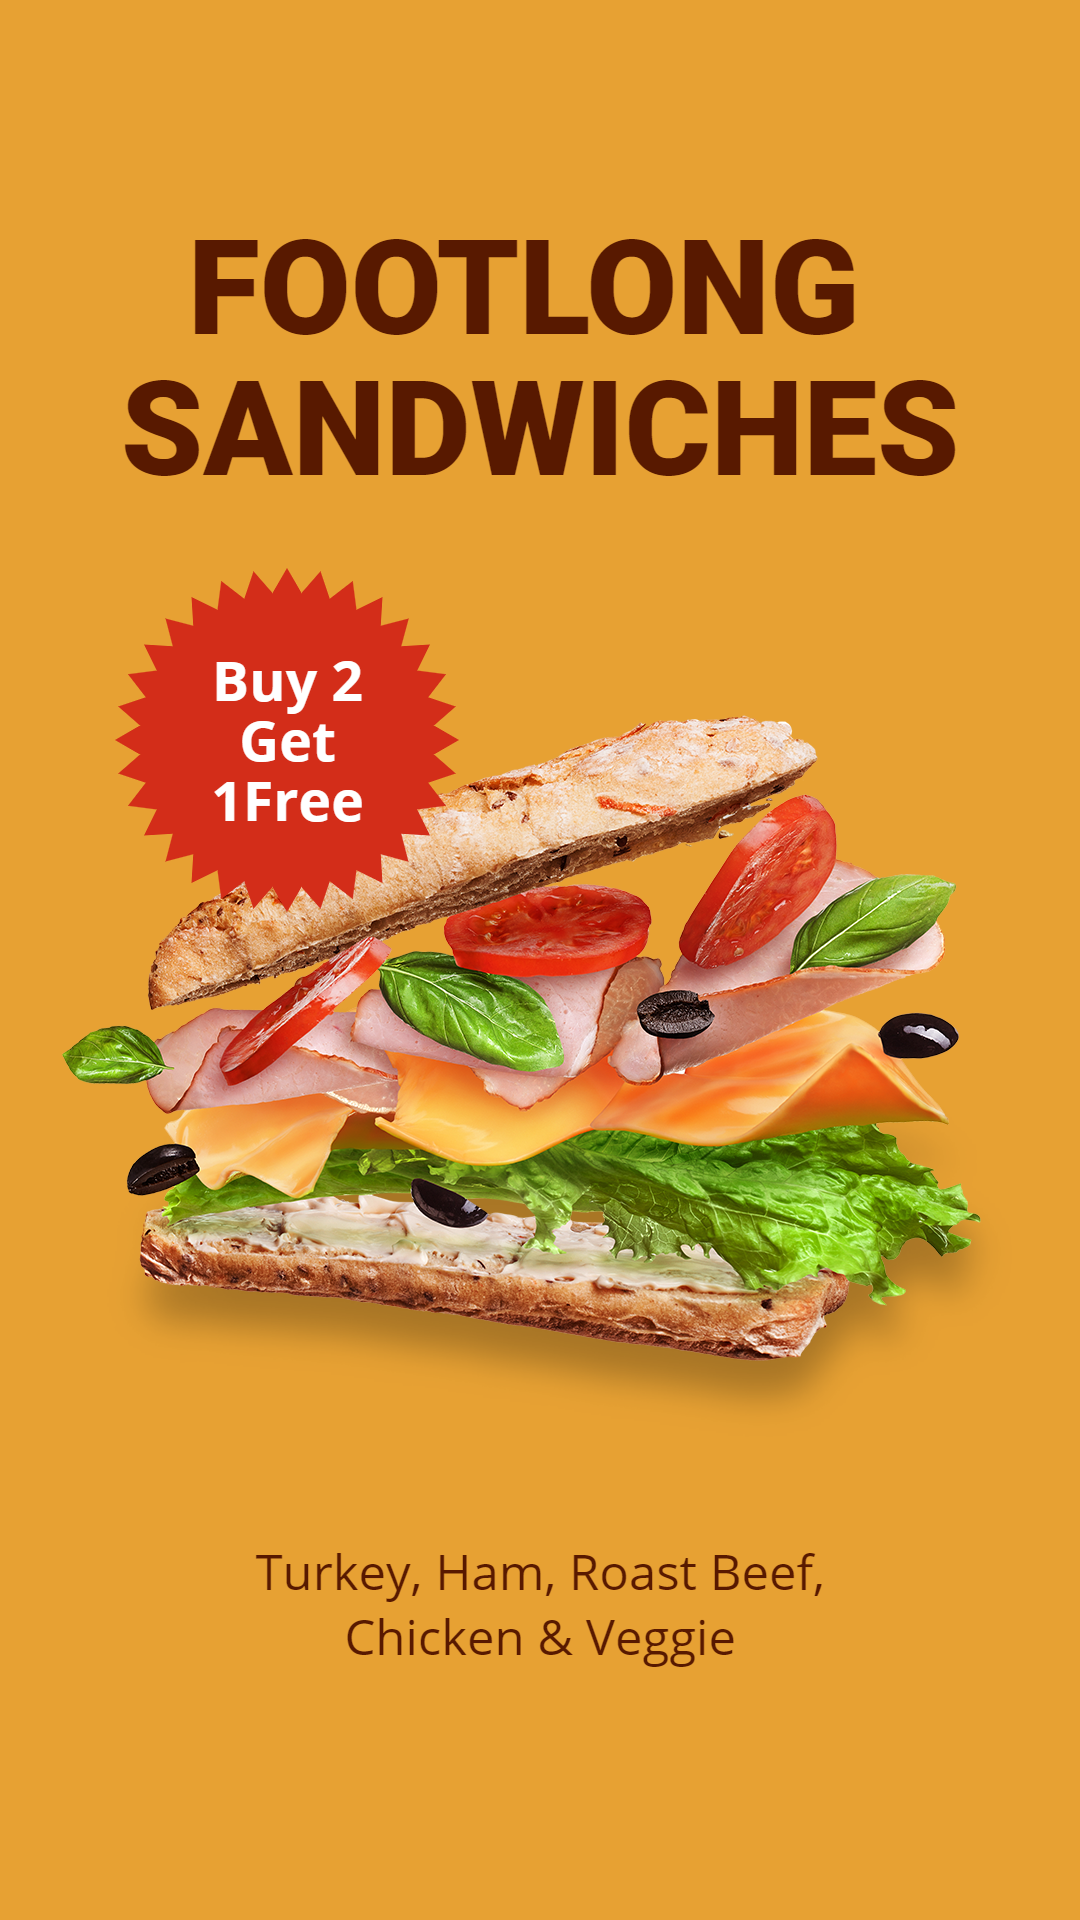 Footlong Sandwiches Sales Ecommerce Story